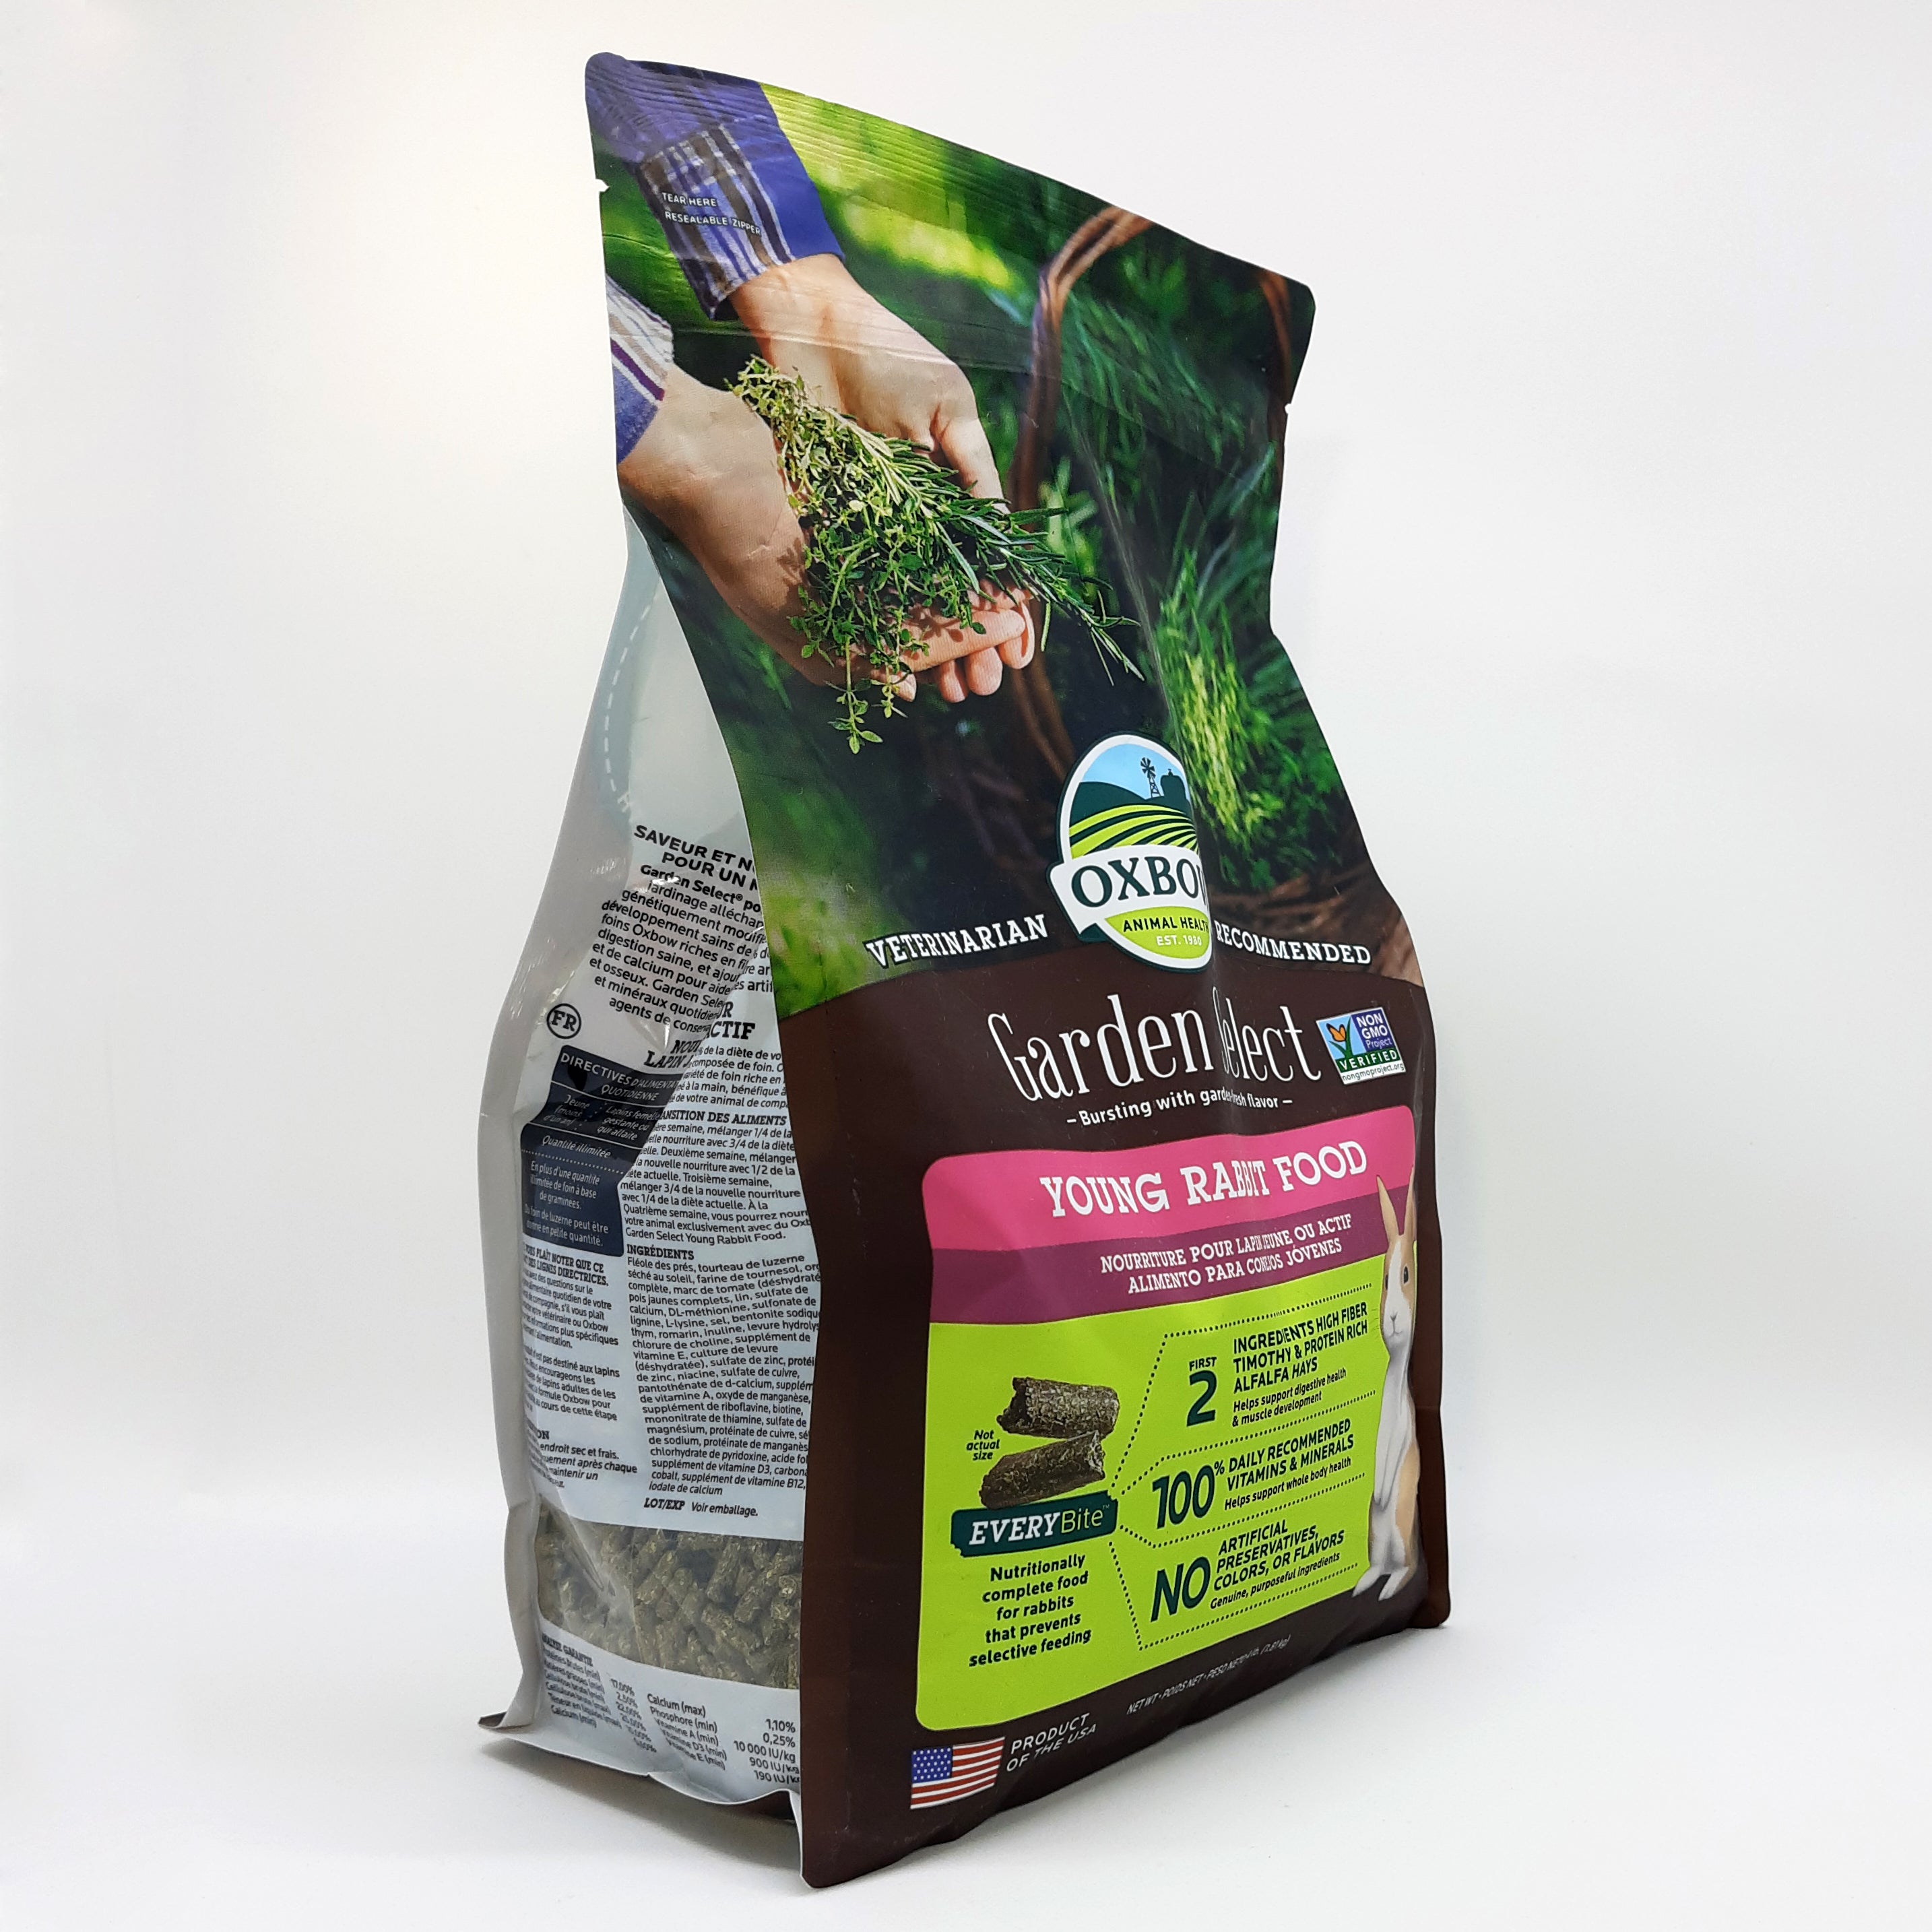 Garden Select Oxbow Young Rabbit Food 1.8 Kg